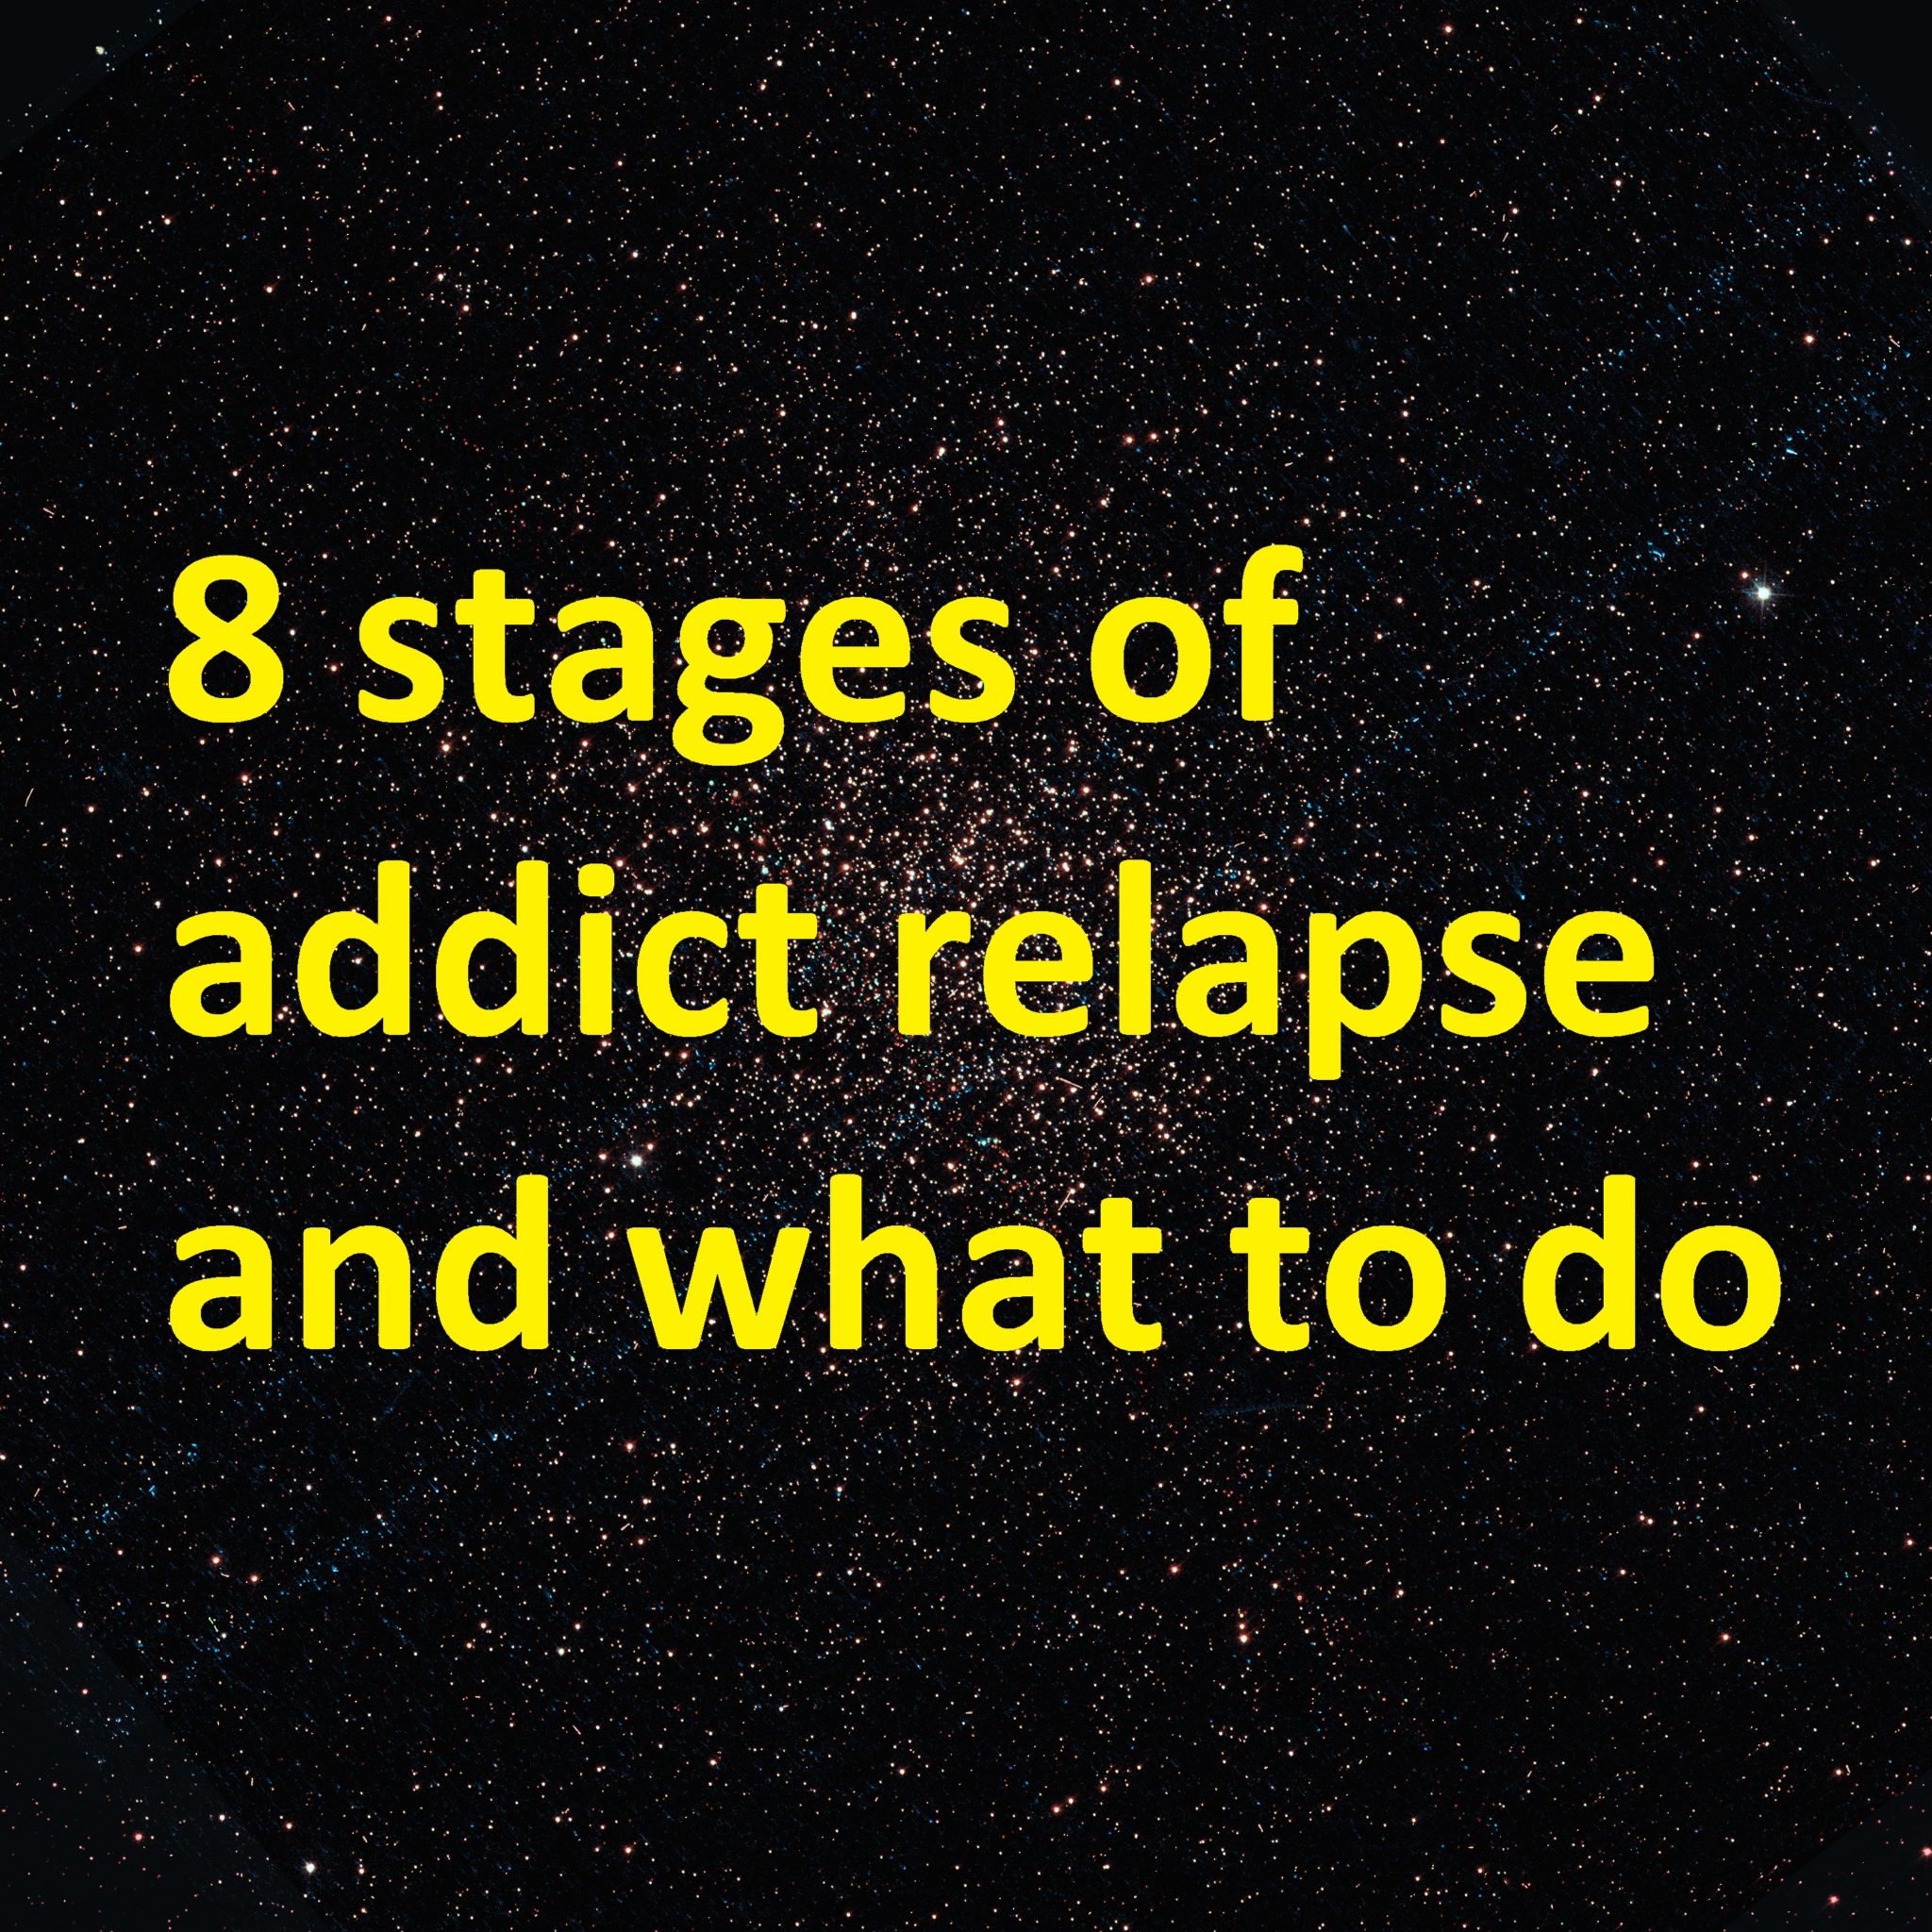 8 stages of addict relapse and what to do